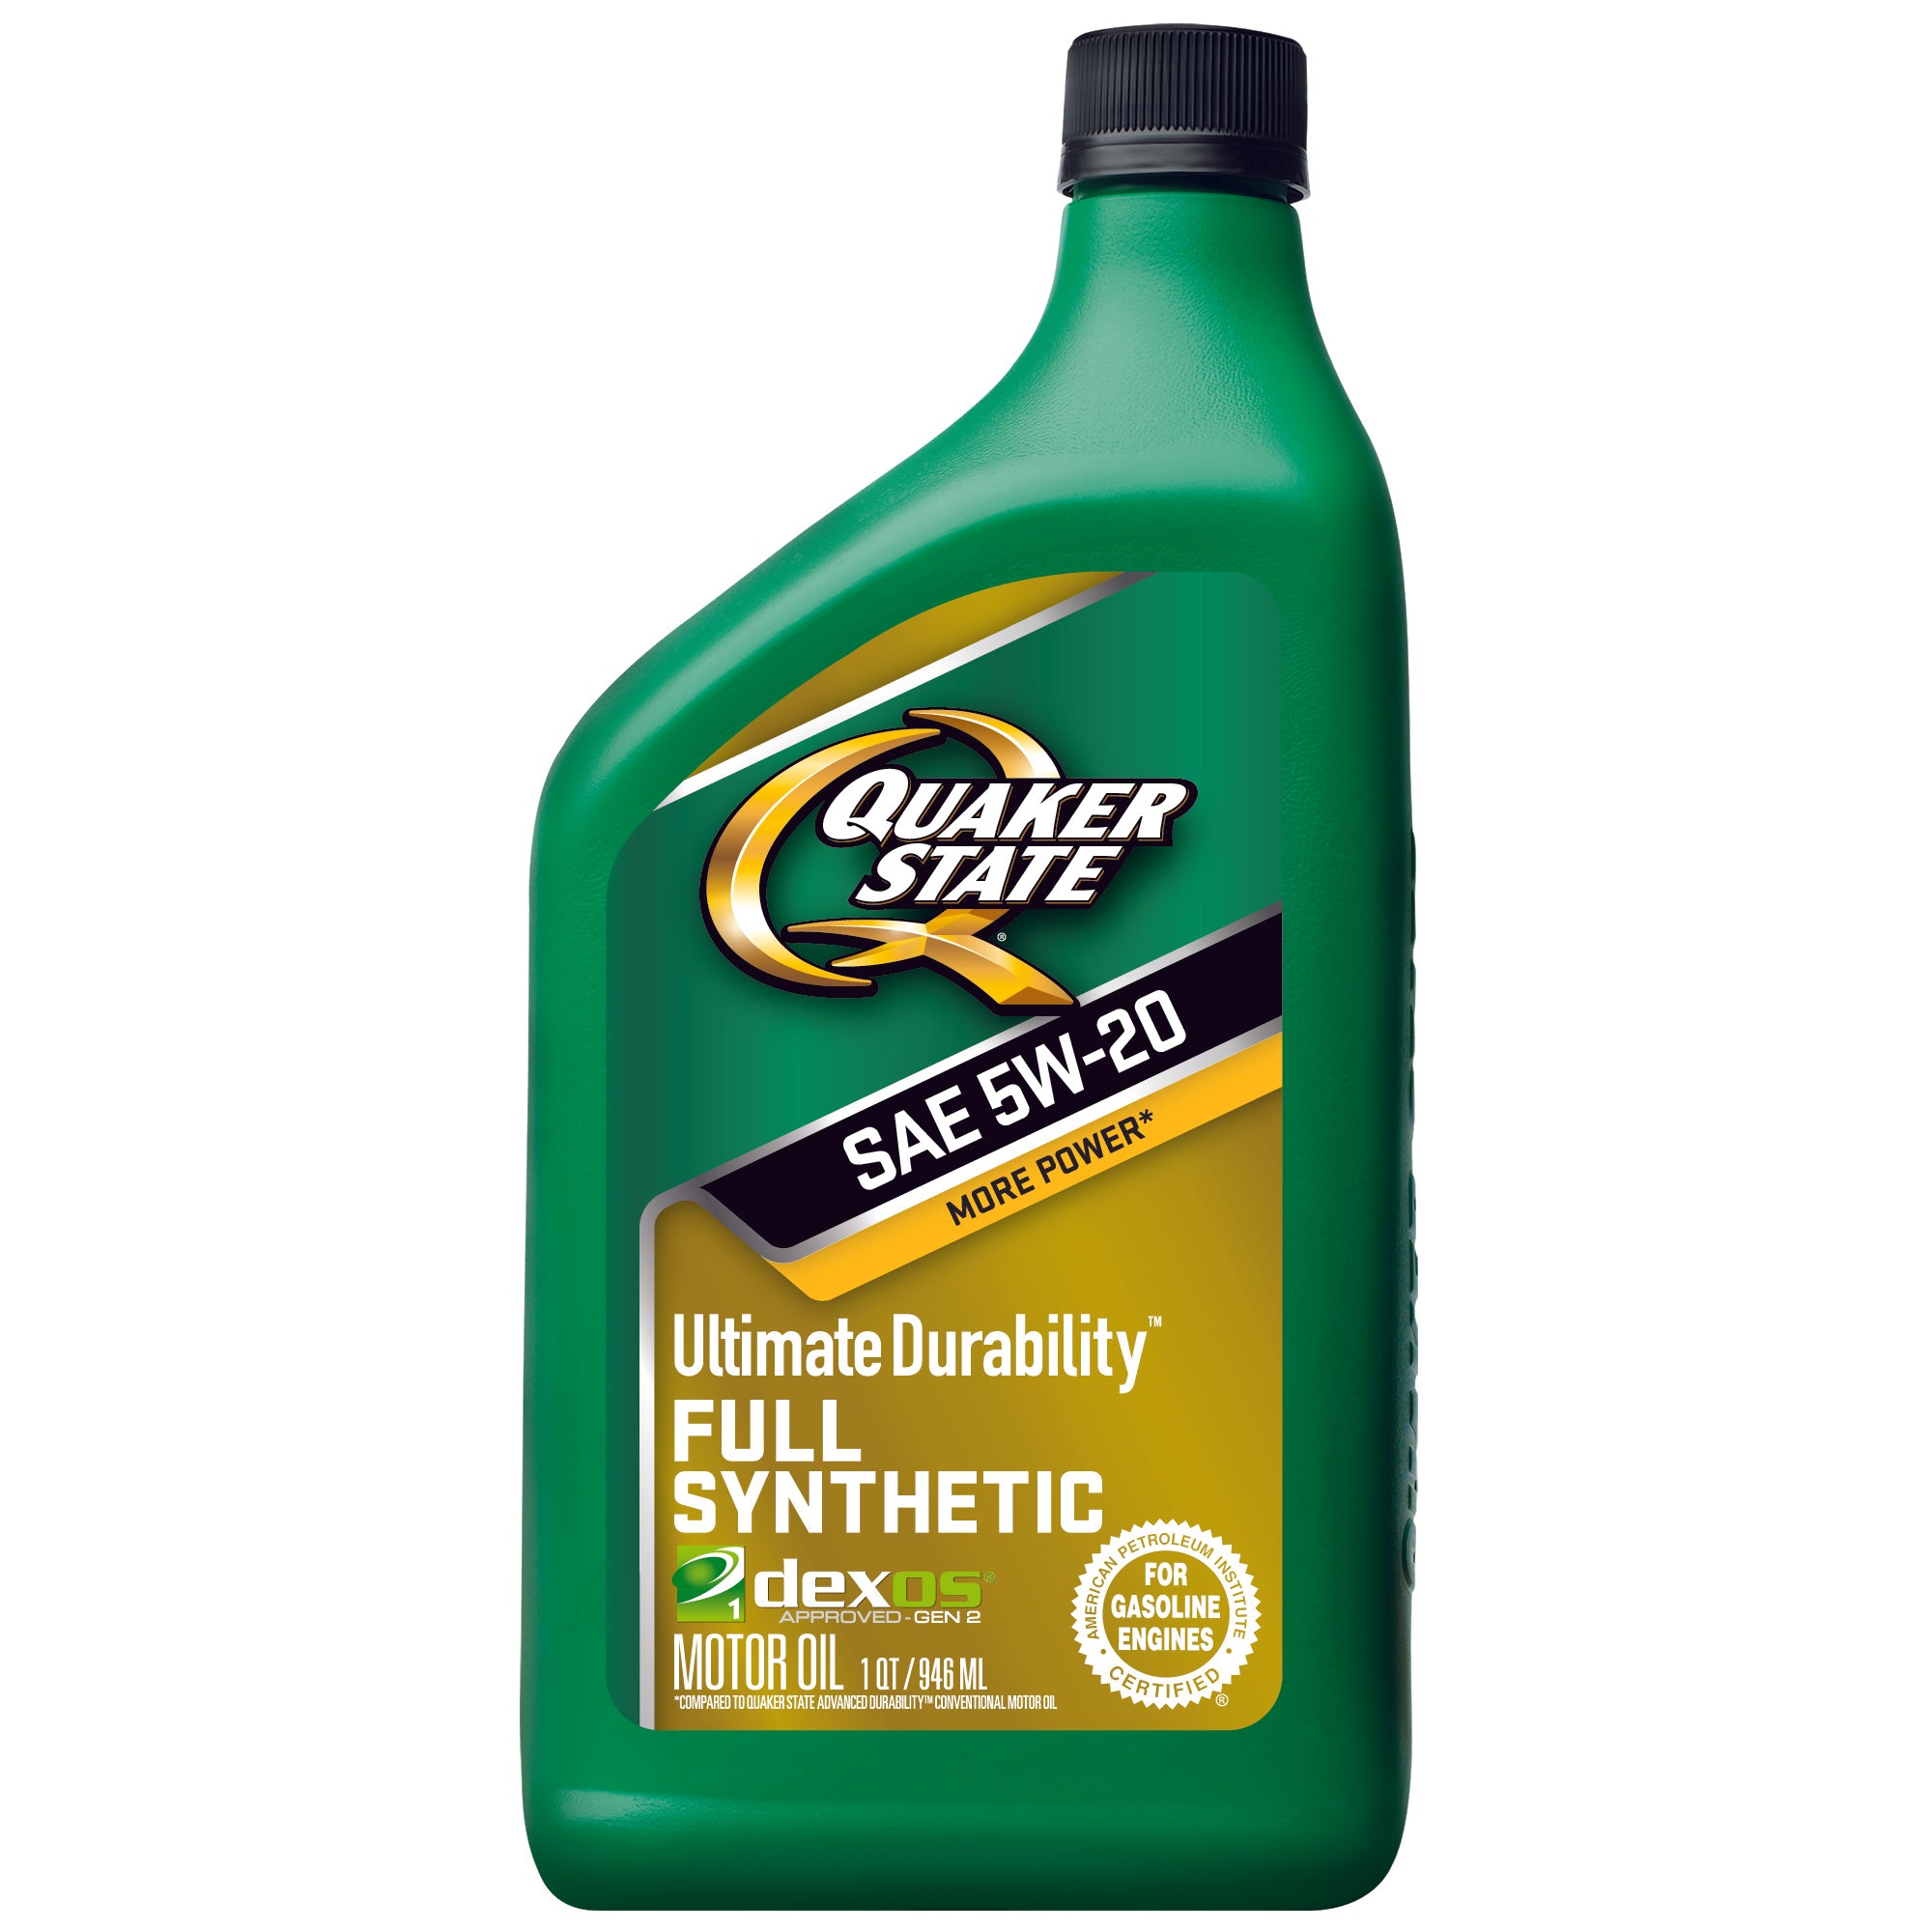 Quaker State Ultimate Durability SAE 5W 20 Full Synthetic Motor Oil Case of 6 1 qt